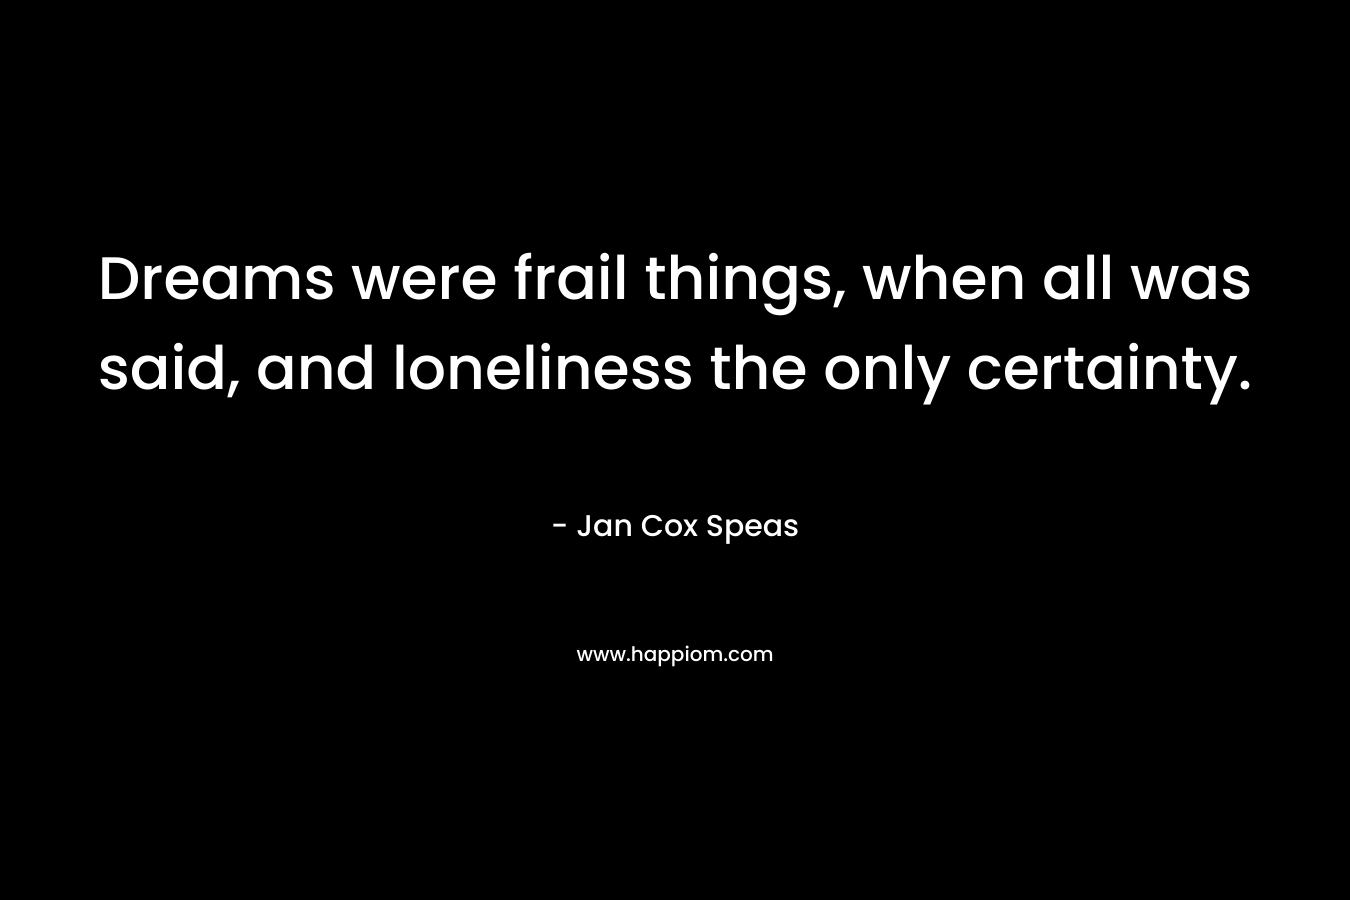 Dreams were frail things, when all was said, and loneliness the only certainty.